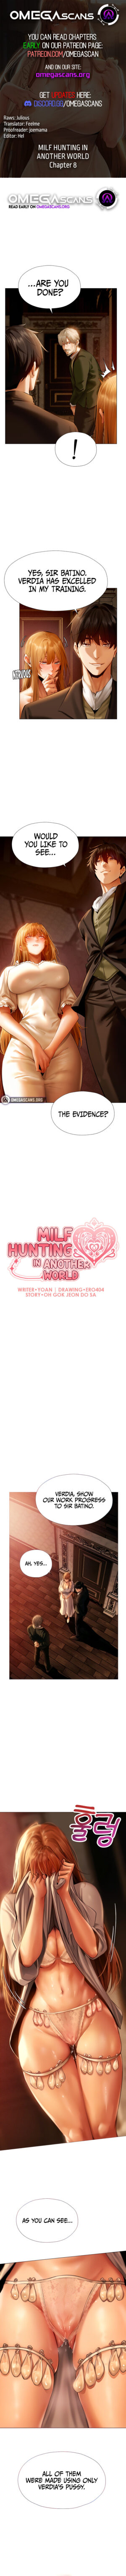 [ERO404 & Yoan & Oh gok Jeon do sa] Milf Hunting in Another World (1-21) [English] [Omega Scans] [Ongoing]